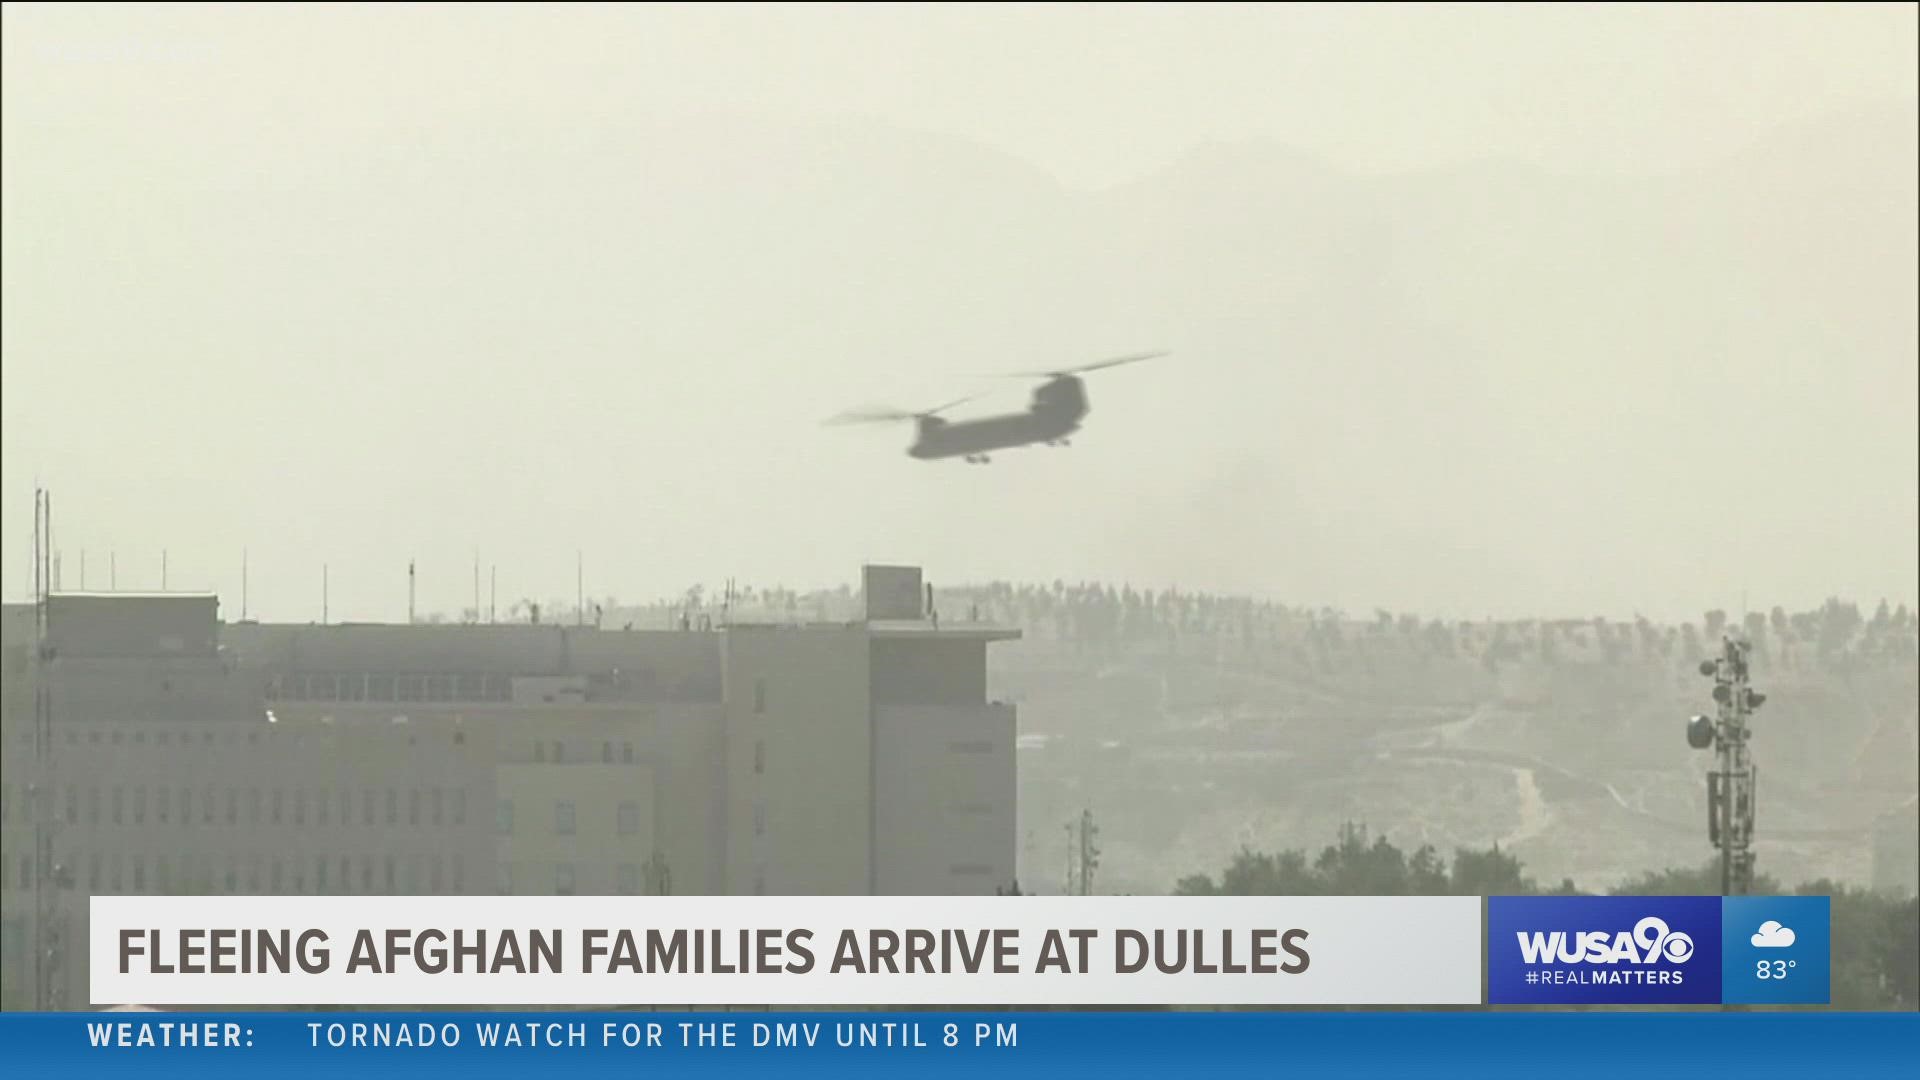 Families fleeing Afghanistan are now taking commercial flights to get to the United States. Some landed at Dulles Airport Wednesday.